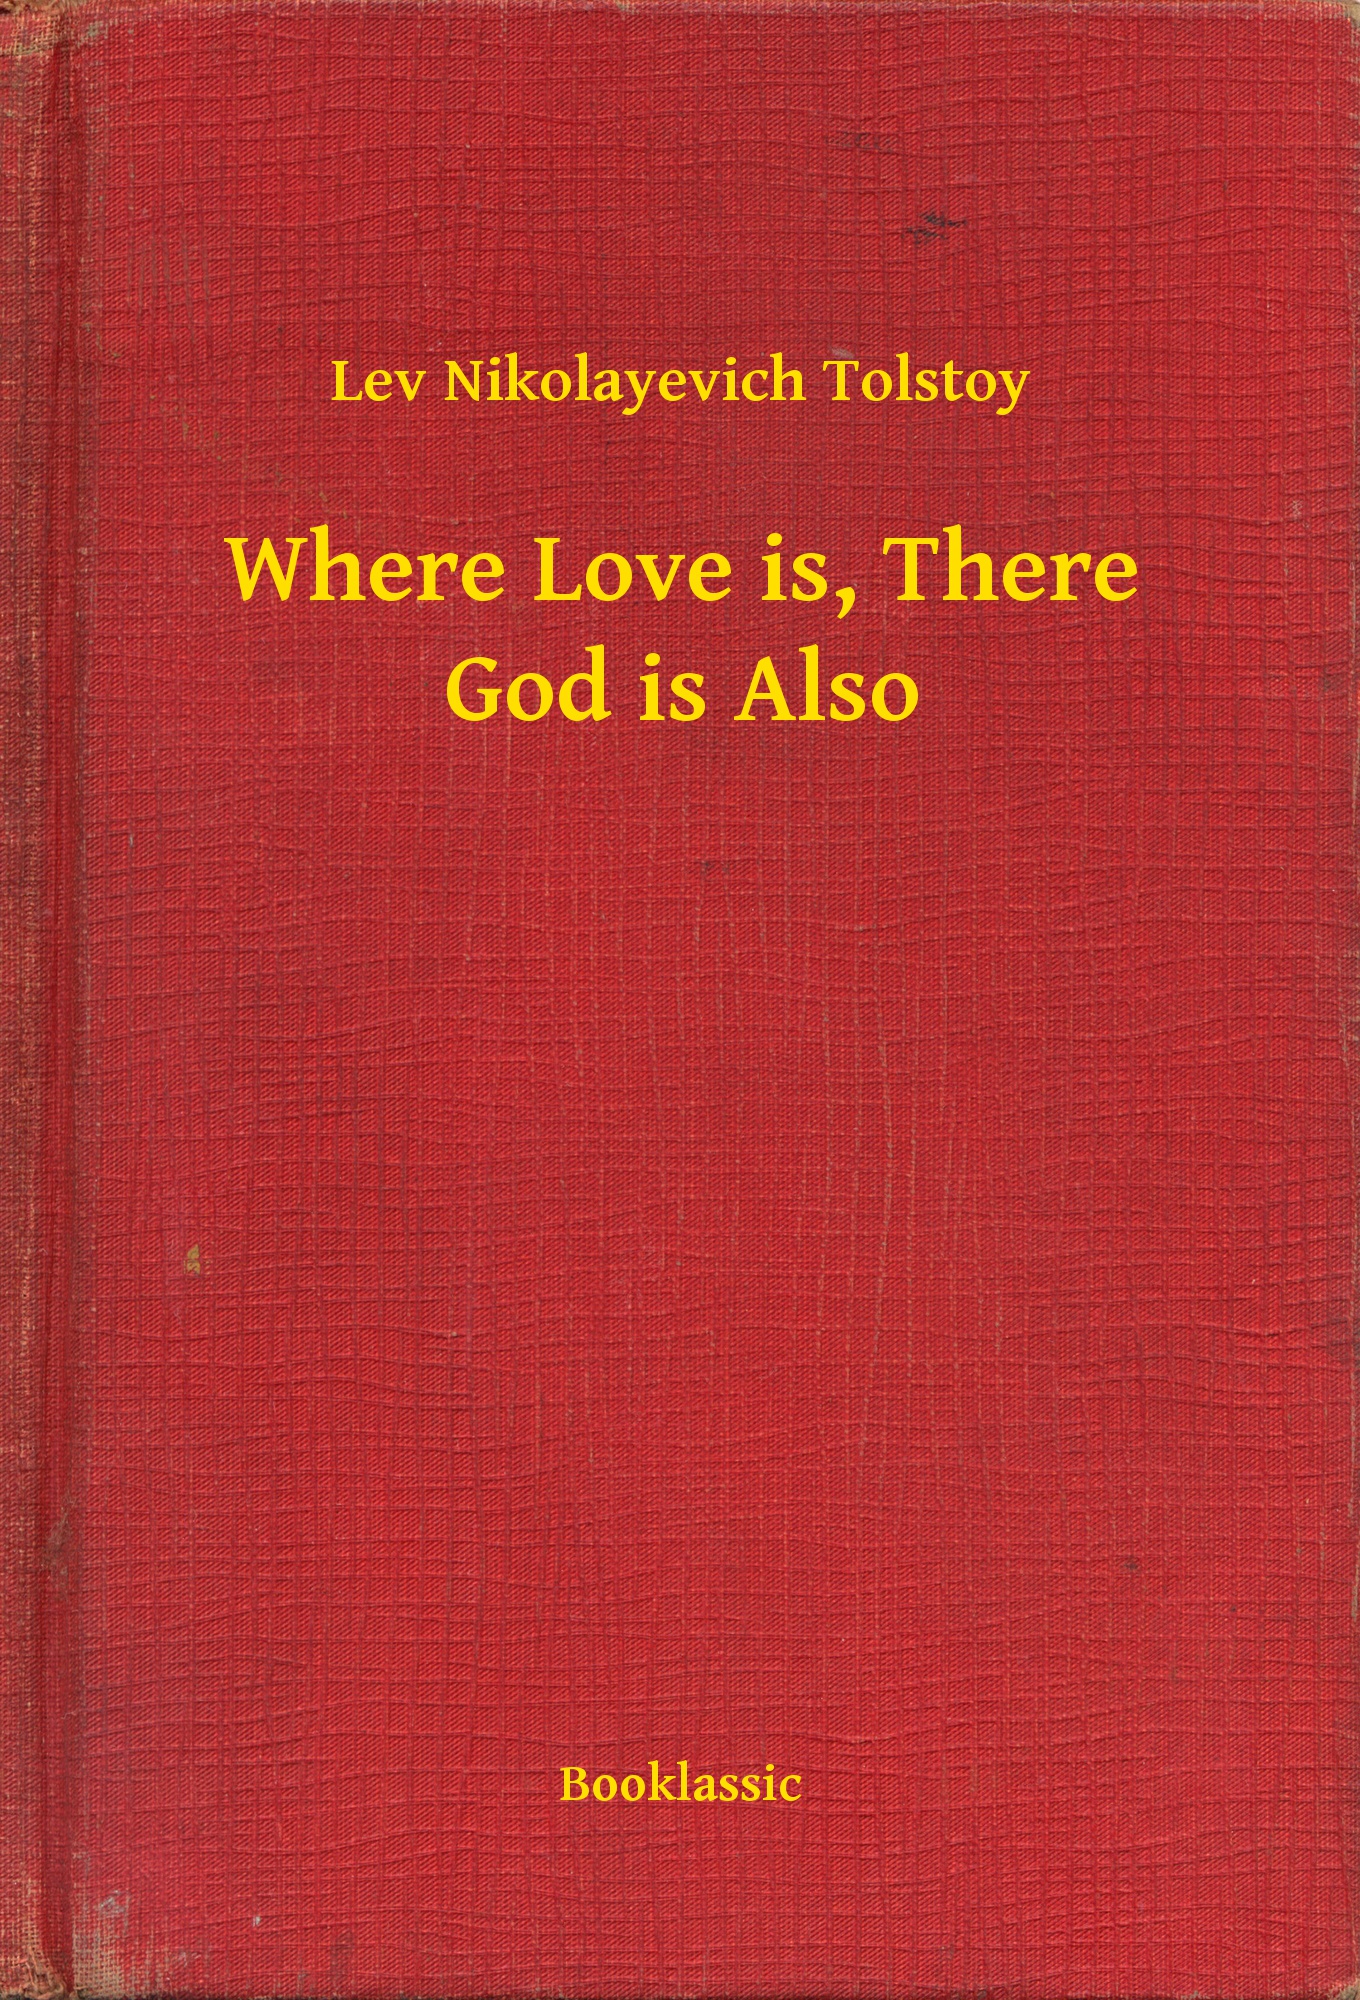 Where Love is, There God is Also